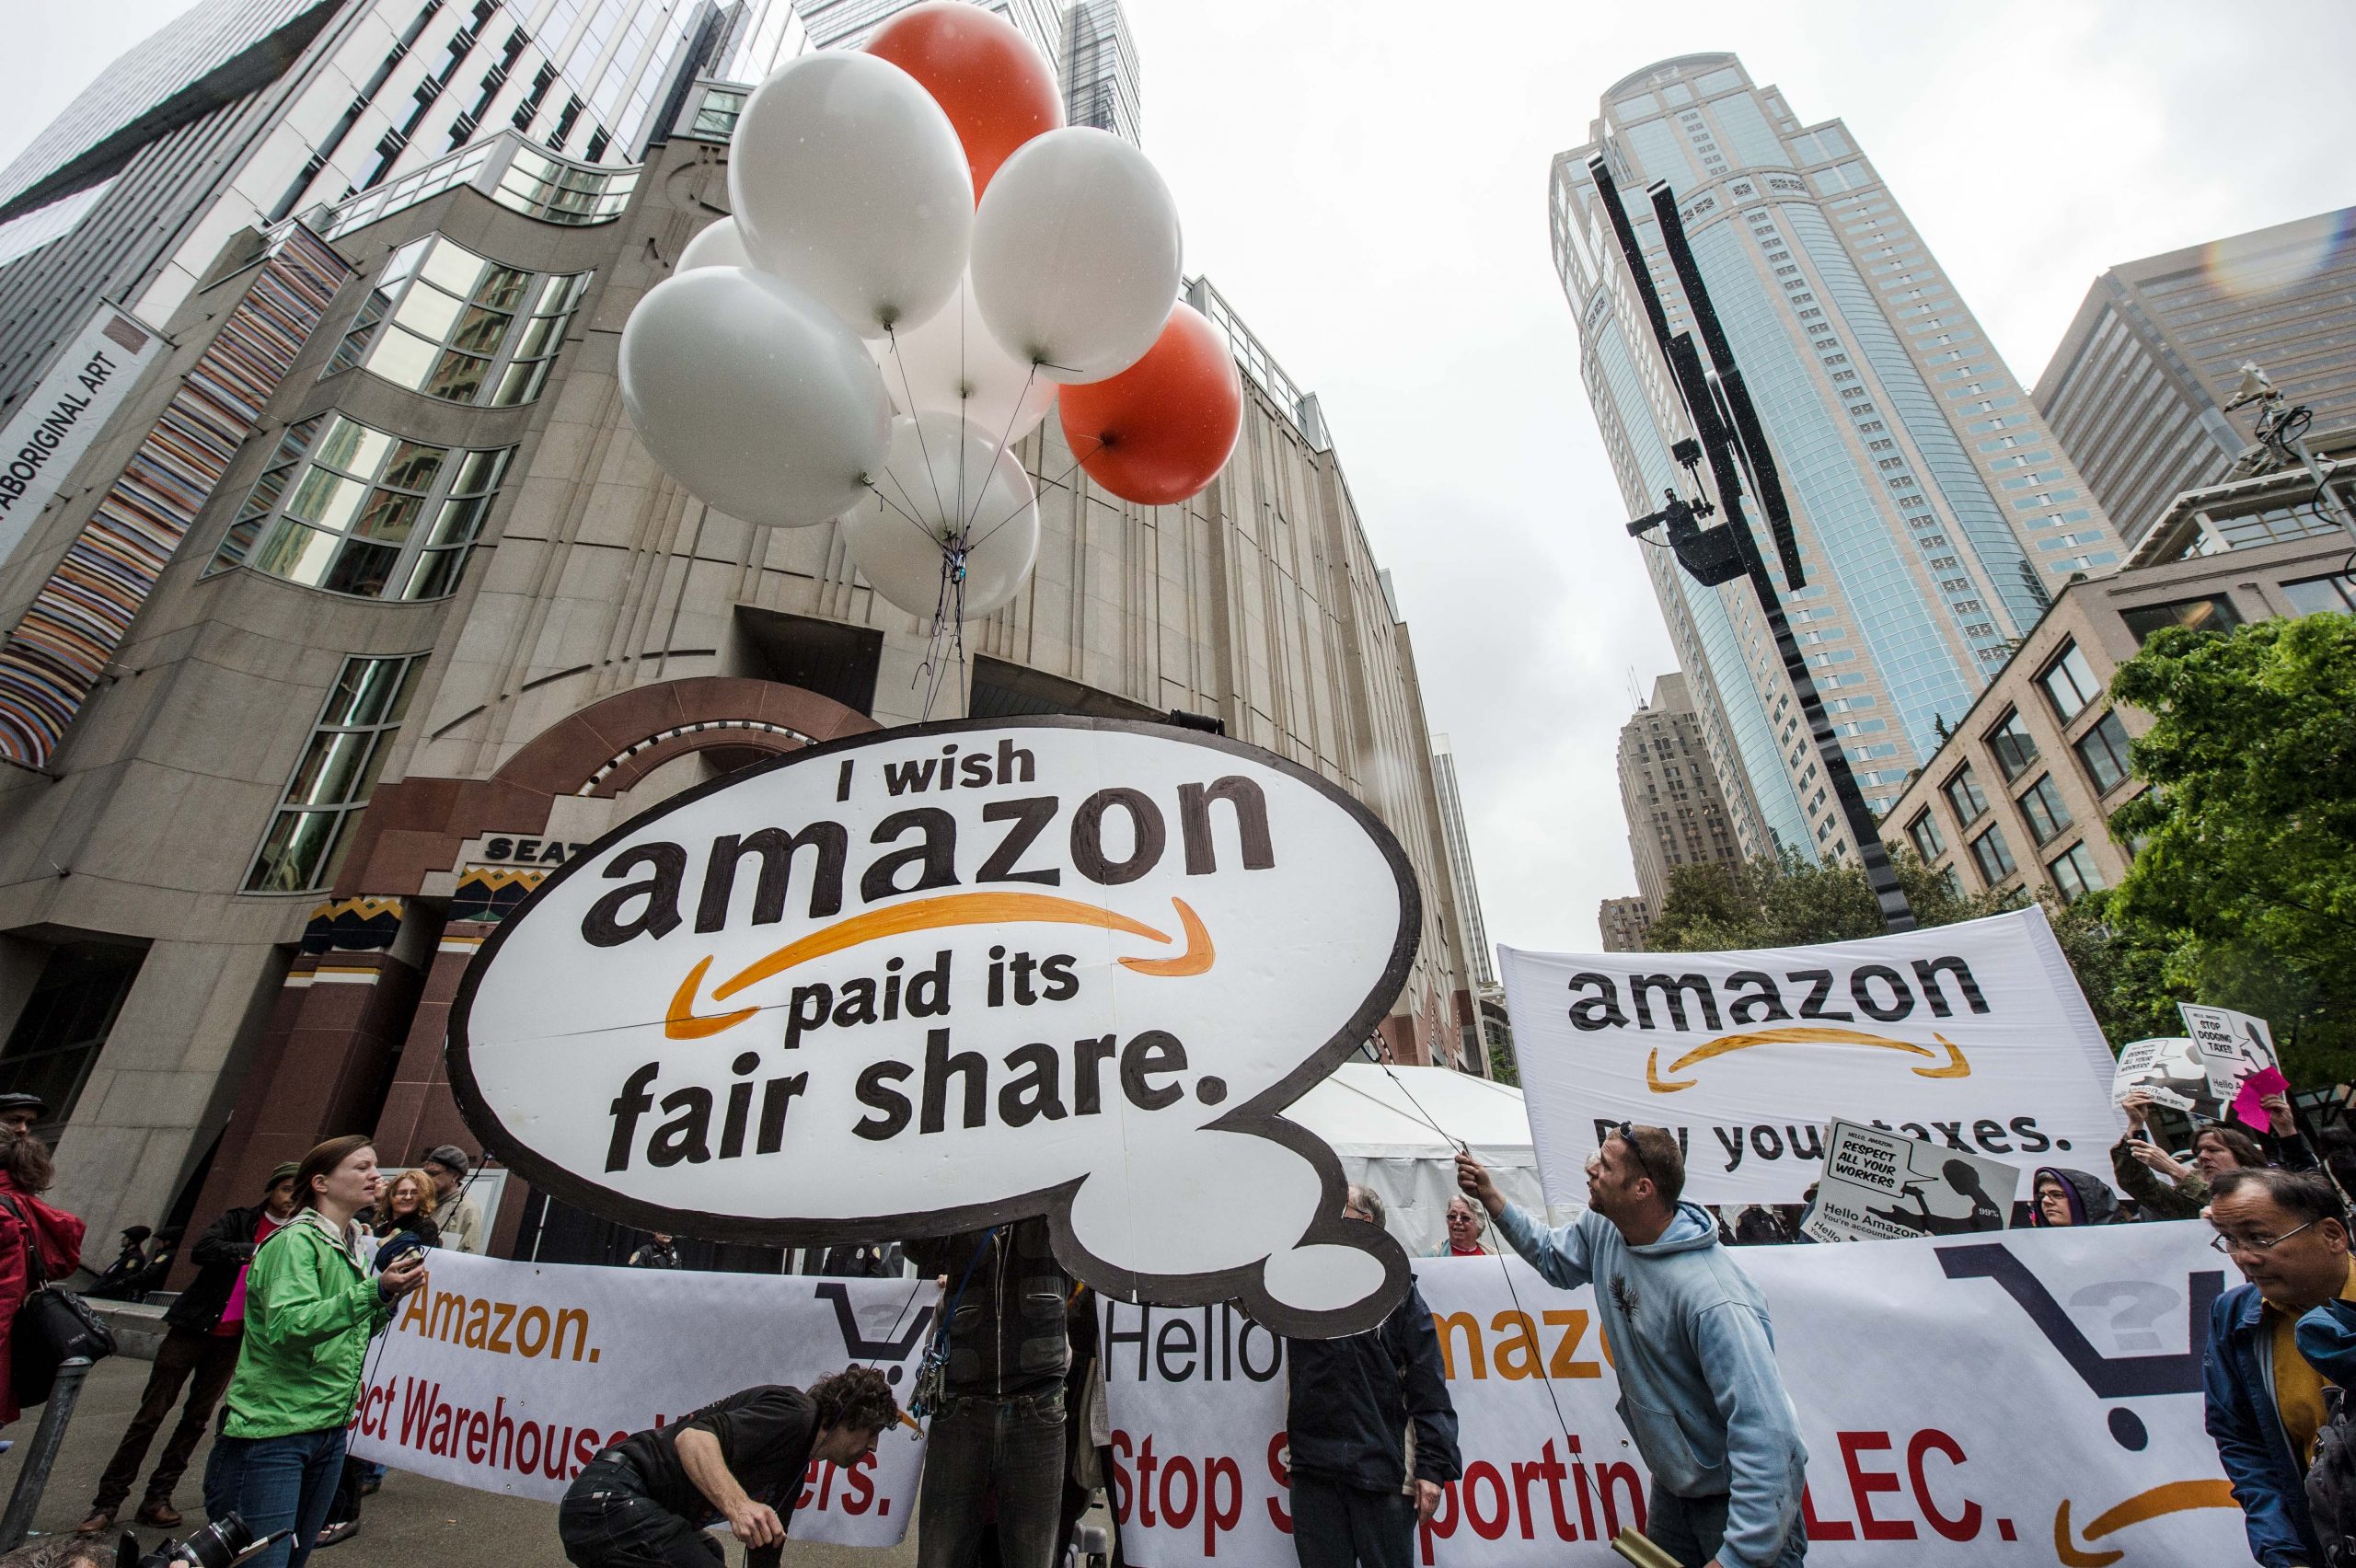 workers organizing for Amazon to pay it's fair share